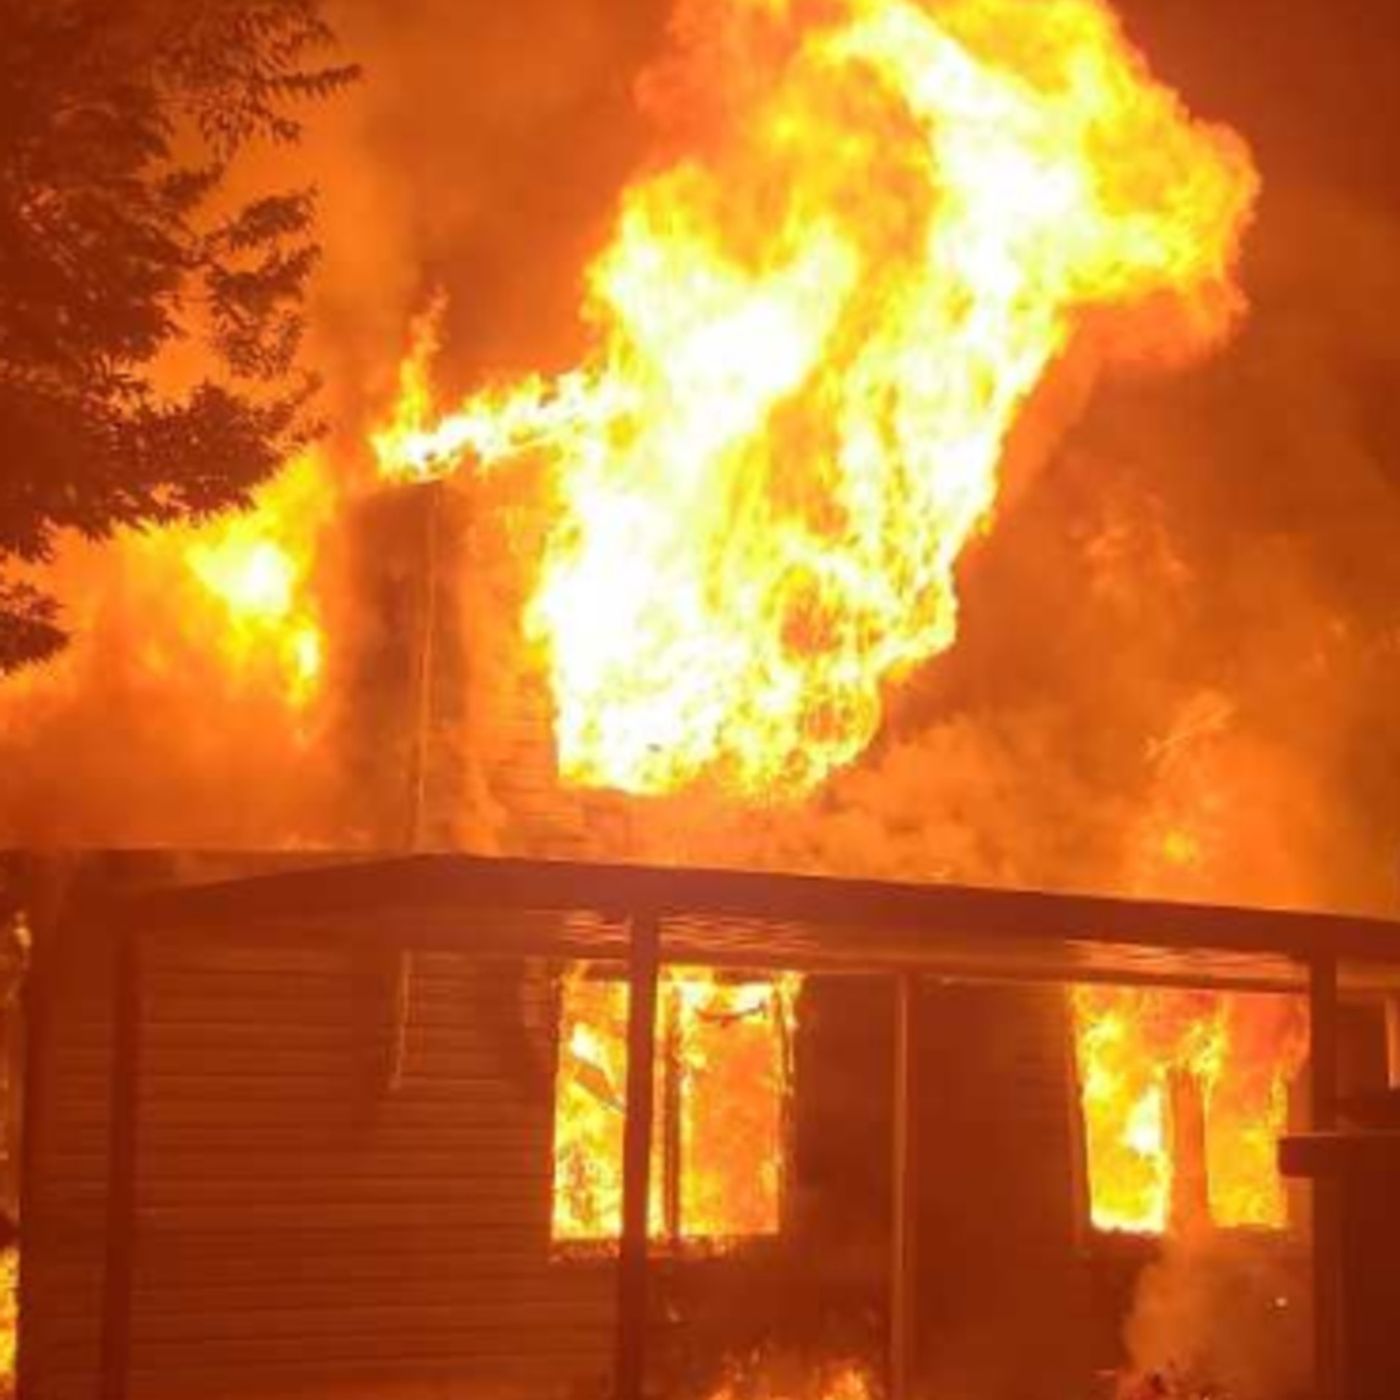 Dream Home Goes Up in Flames